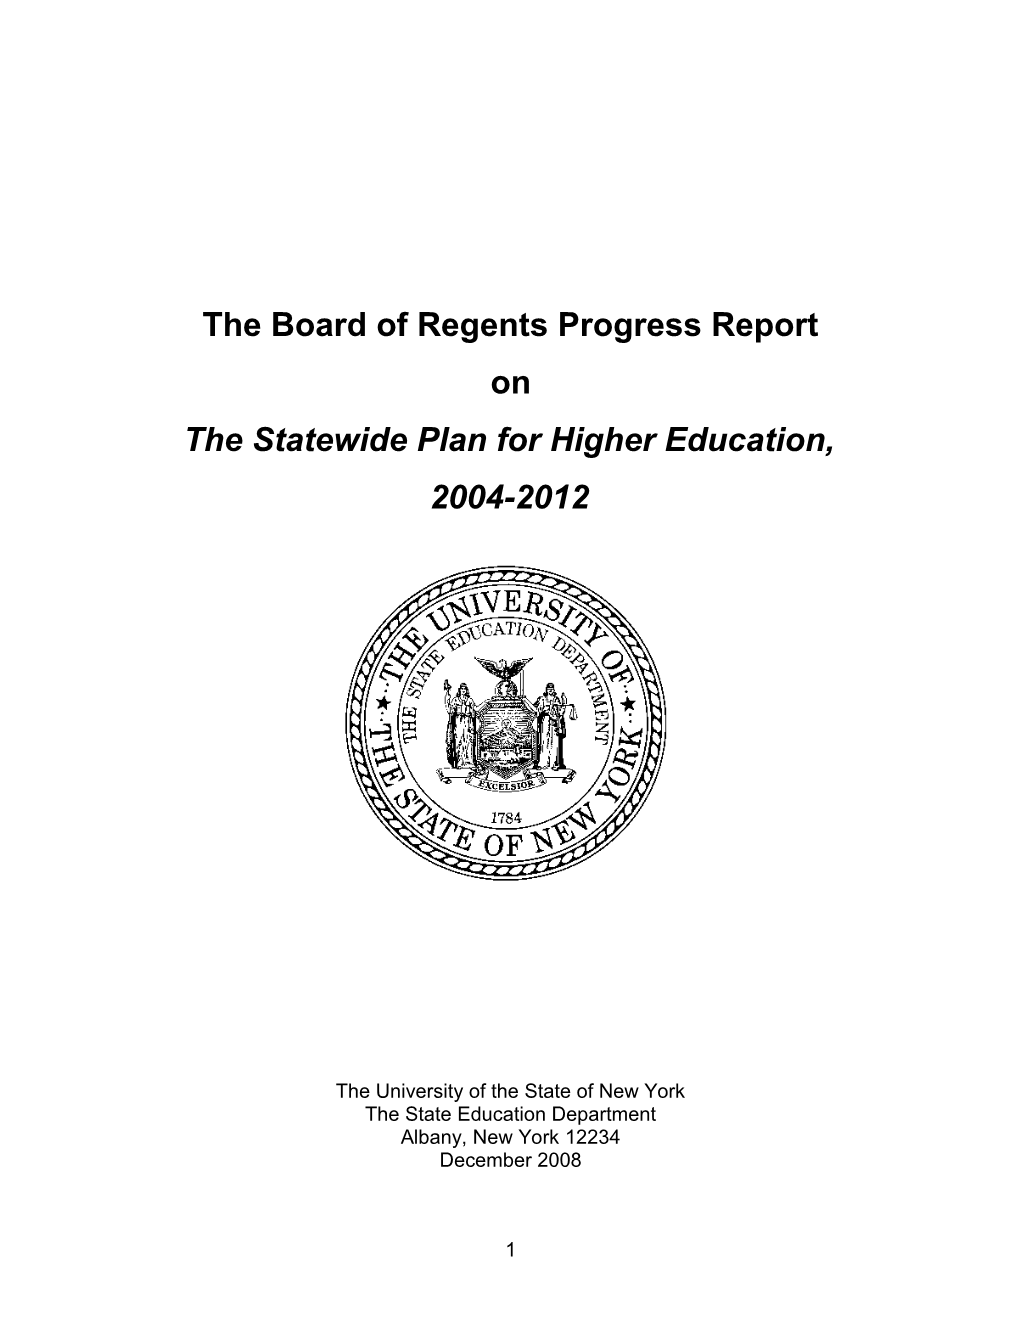 Implementing the Board of Regents Statewide Plan for Higher Education